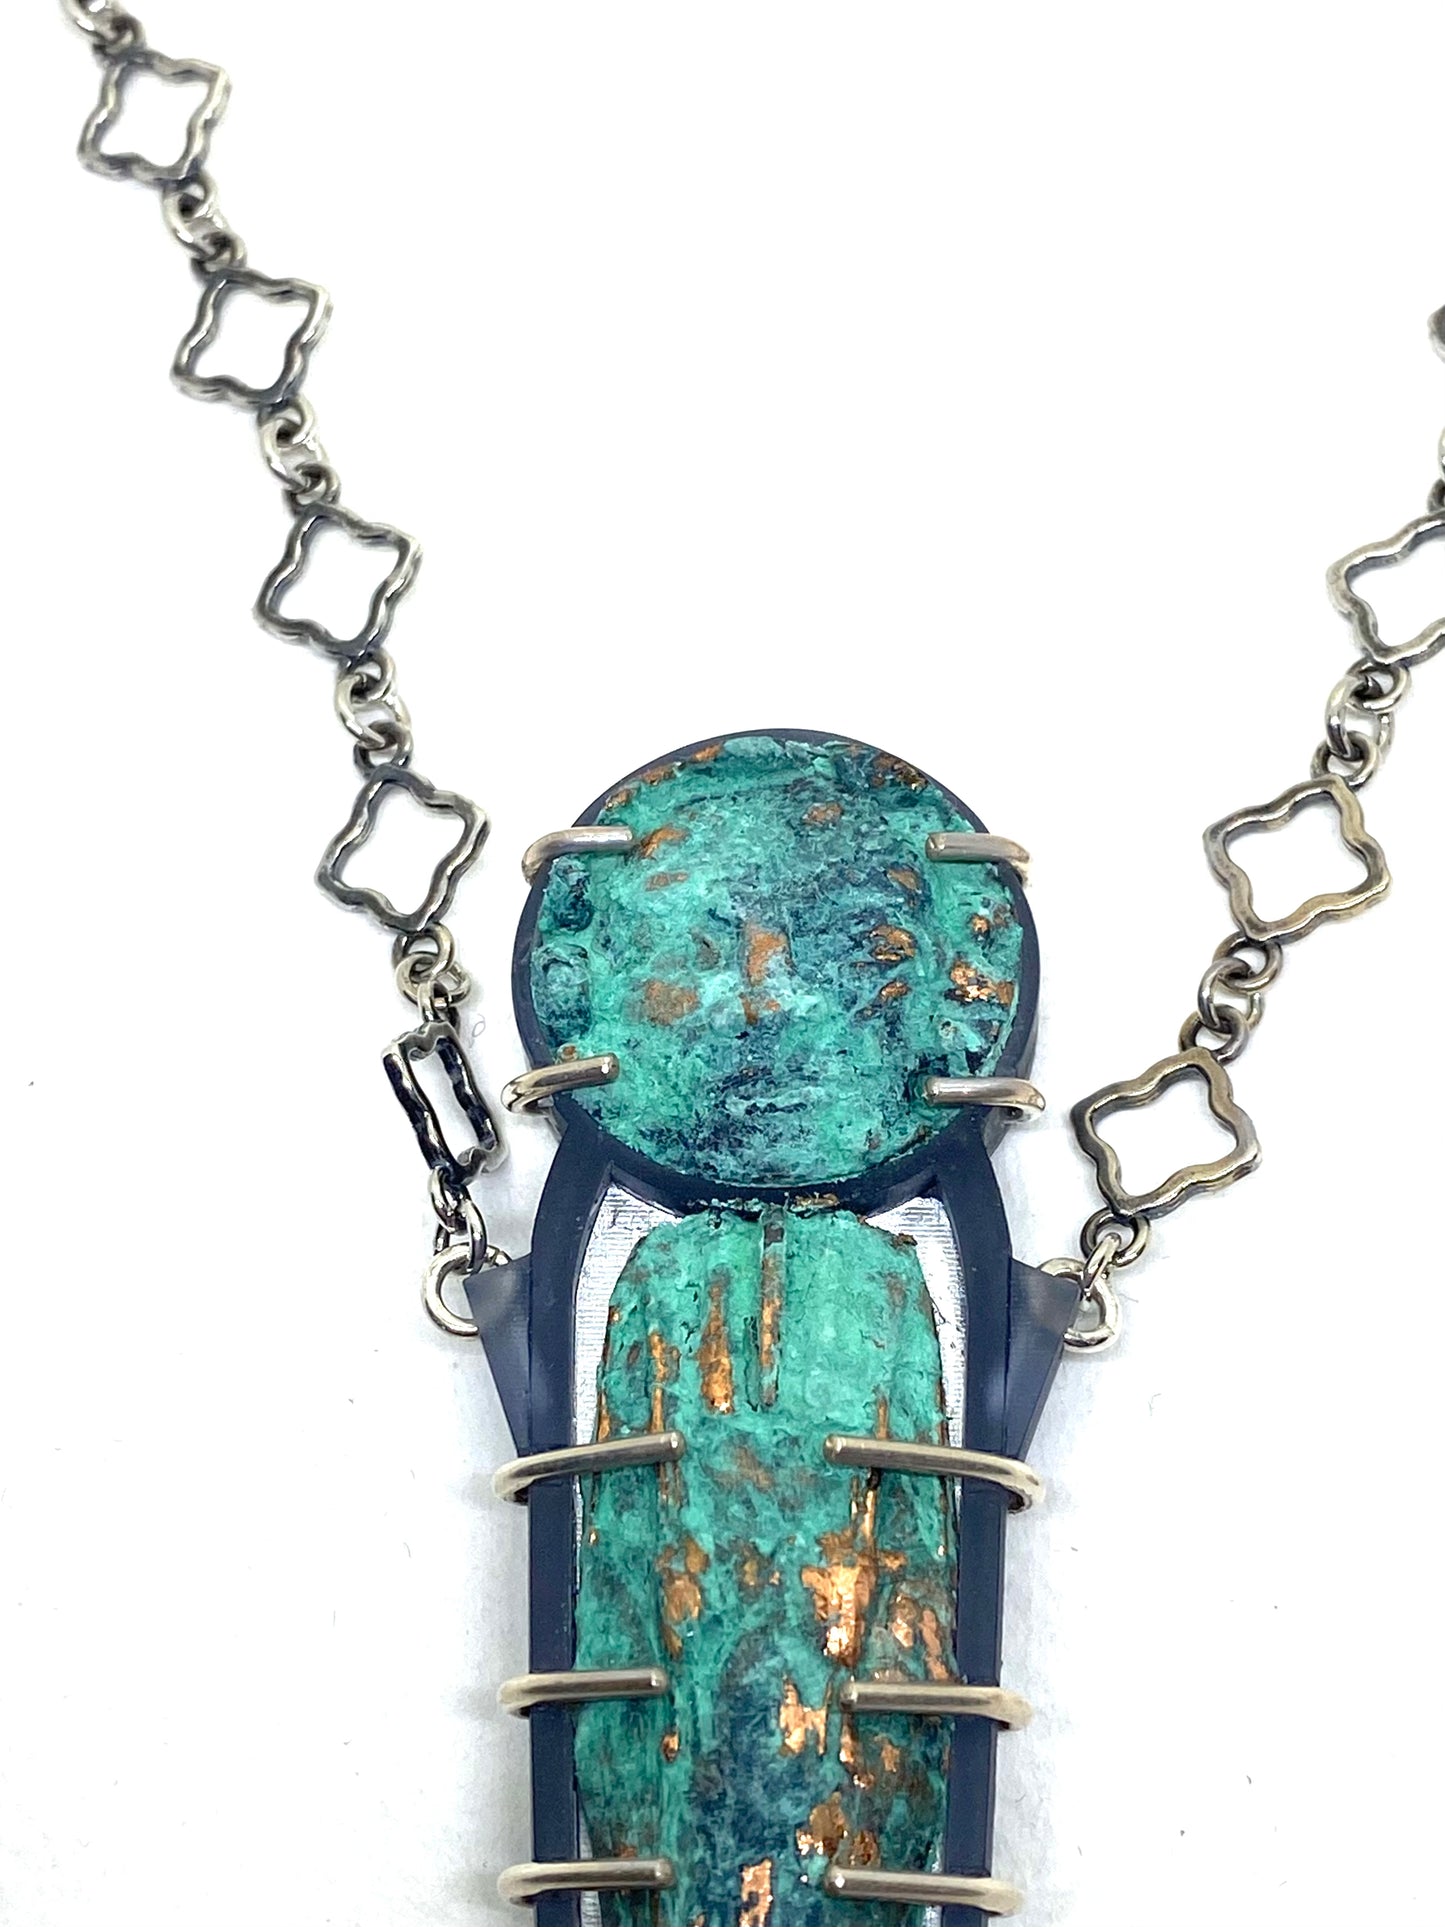 Ushabti Reliquary Necklace Sterling Silver